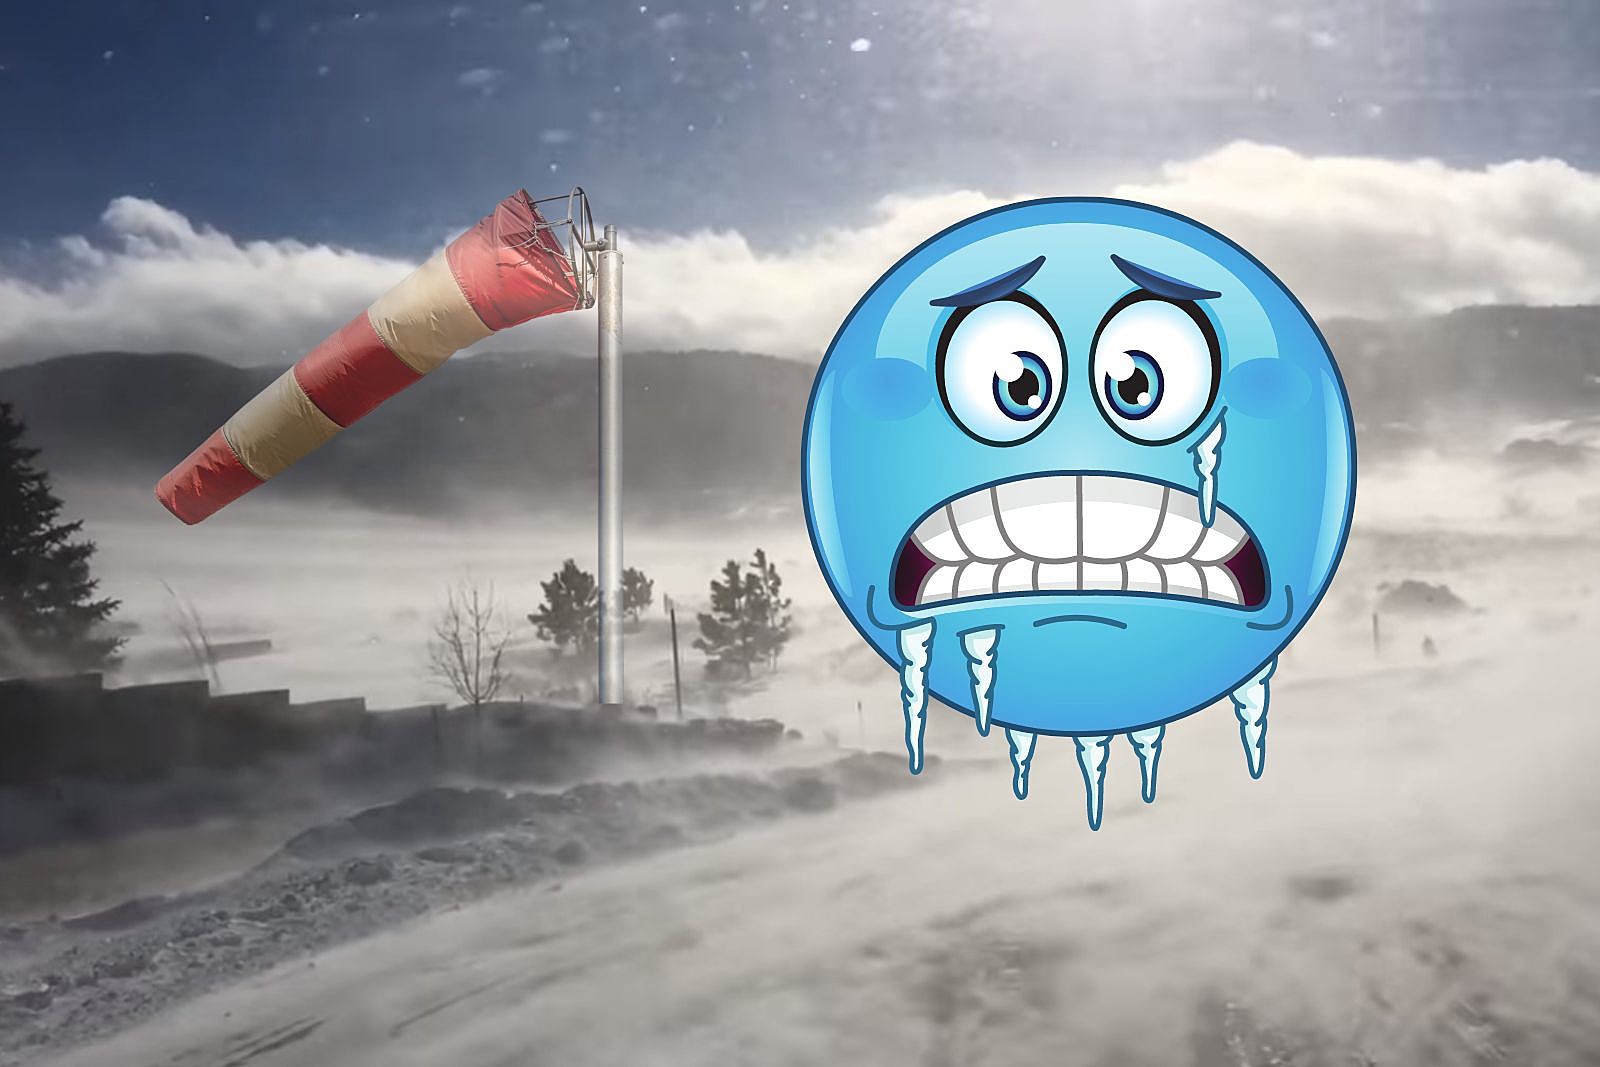 Stay Warm And Safe: It’s Another Weird Day In Wyoming